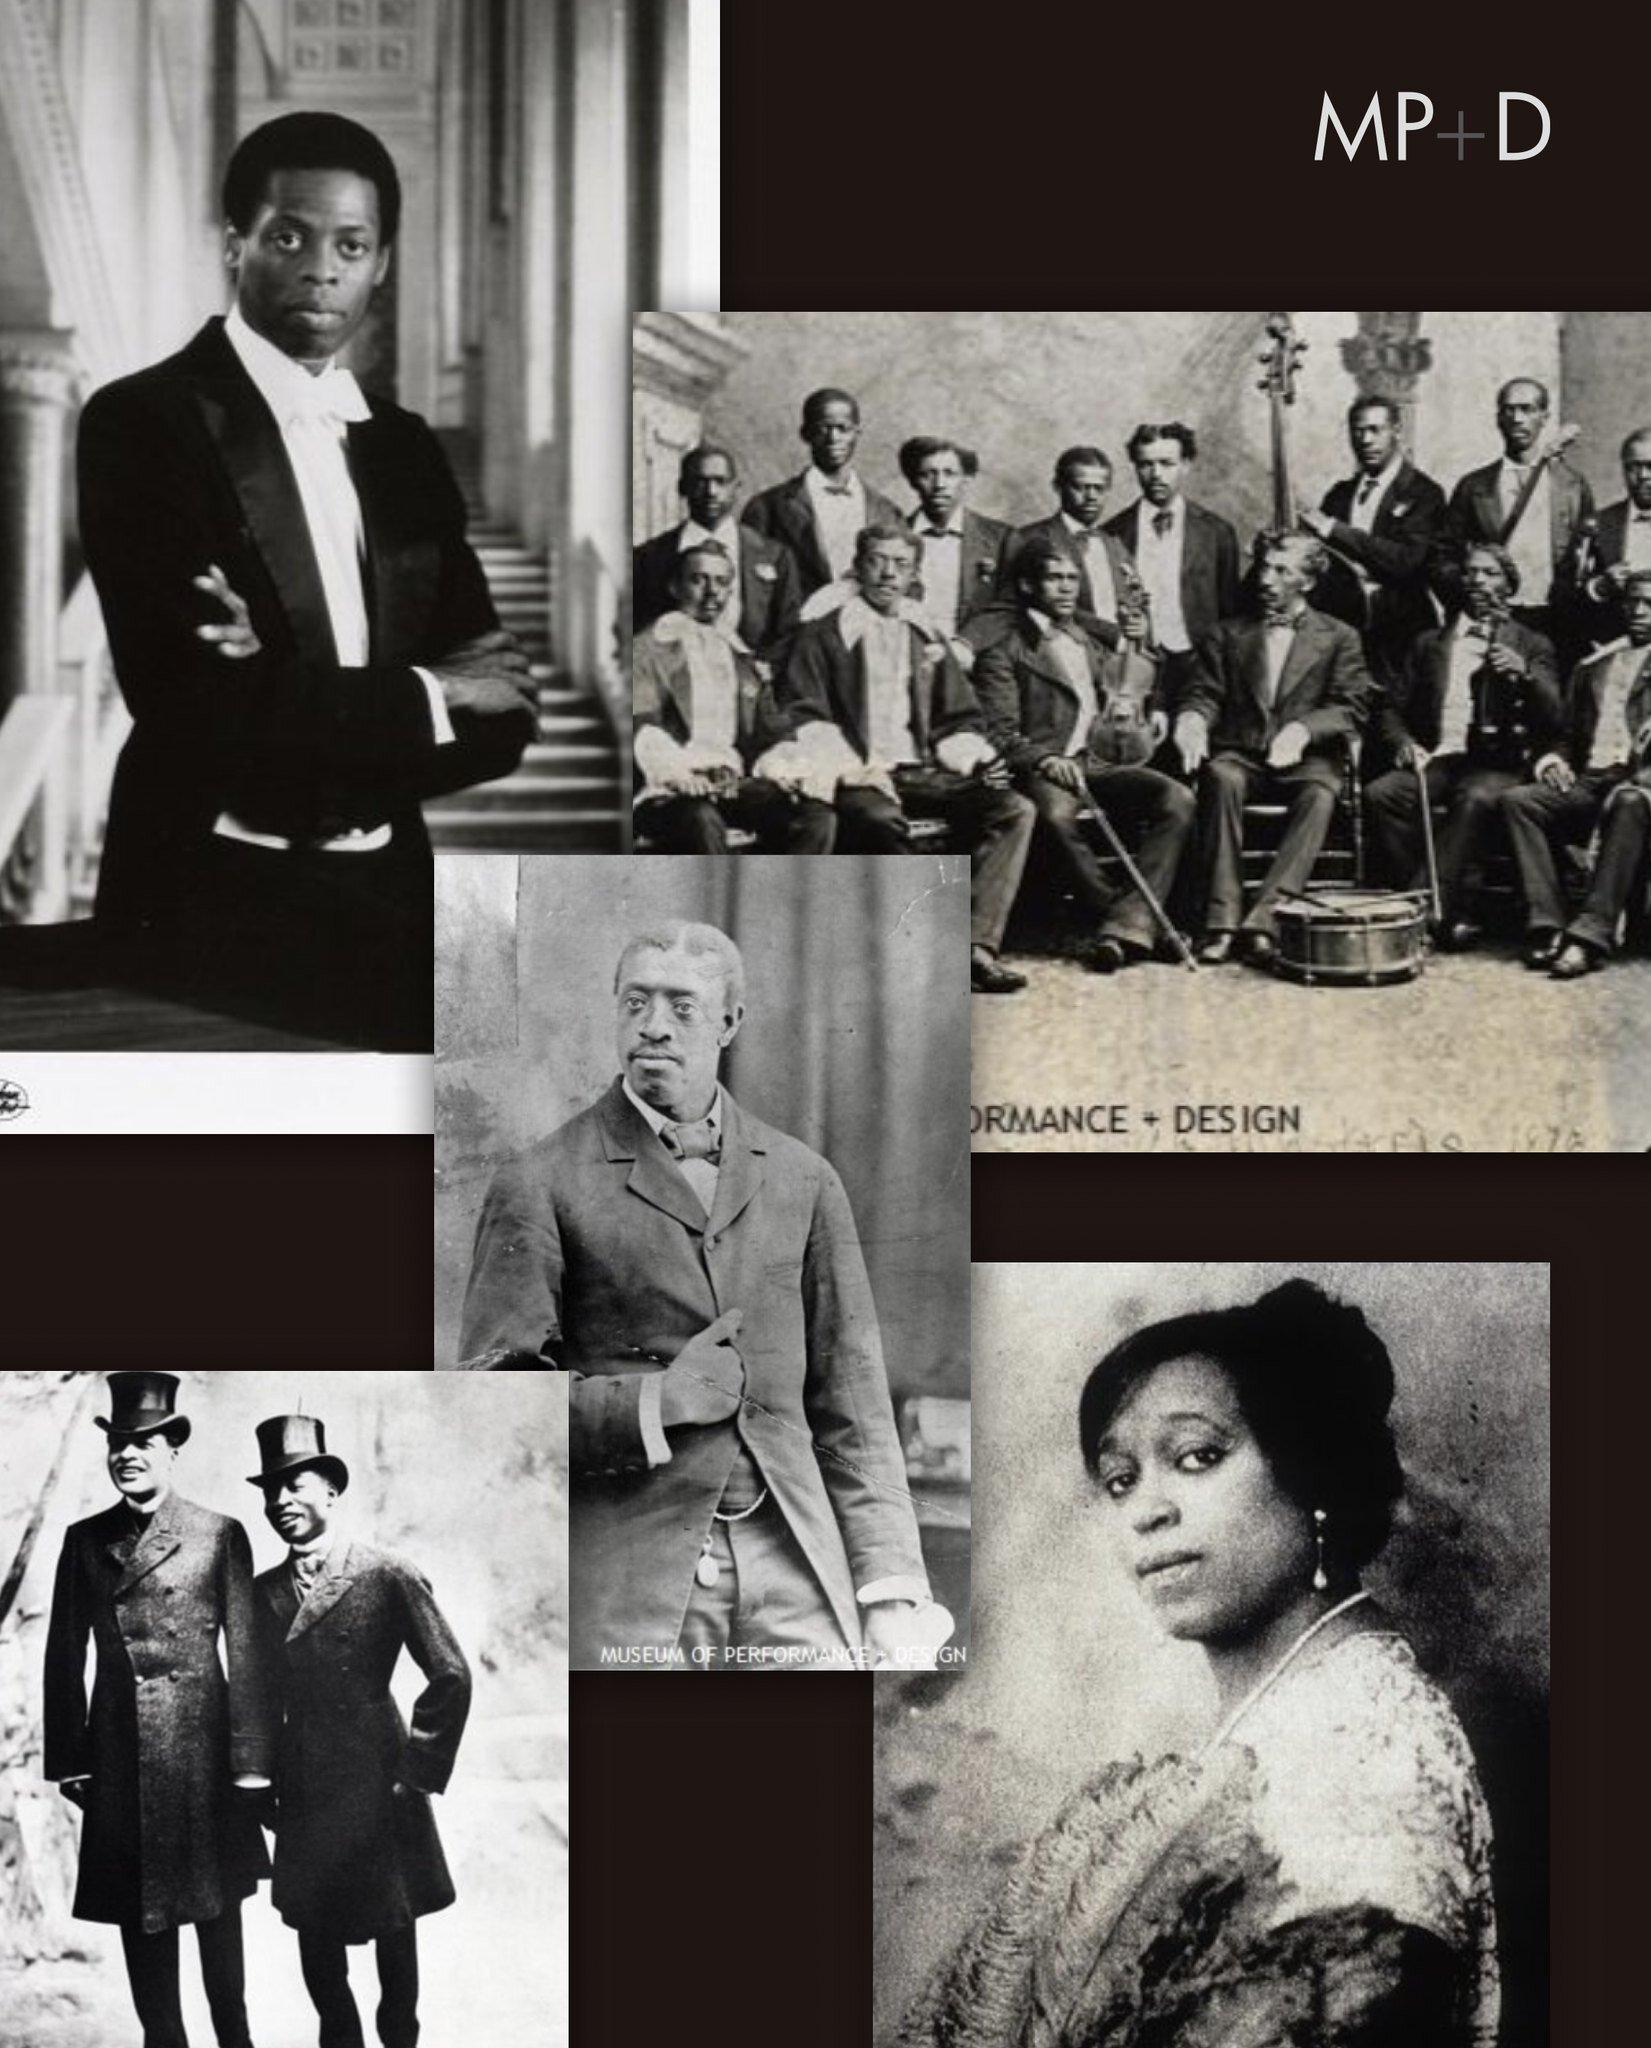 Embark on a journey through time as we honor the trailblazing African American performers who shaped the cultural landscape of San Francisco. From the restrictive minstrels of the 19th century to breaking barriers on Broadway, their legacy echoes in 